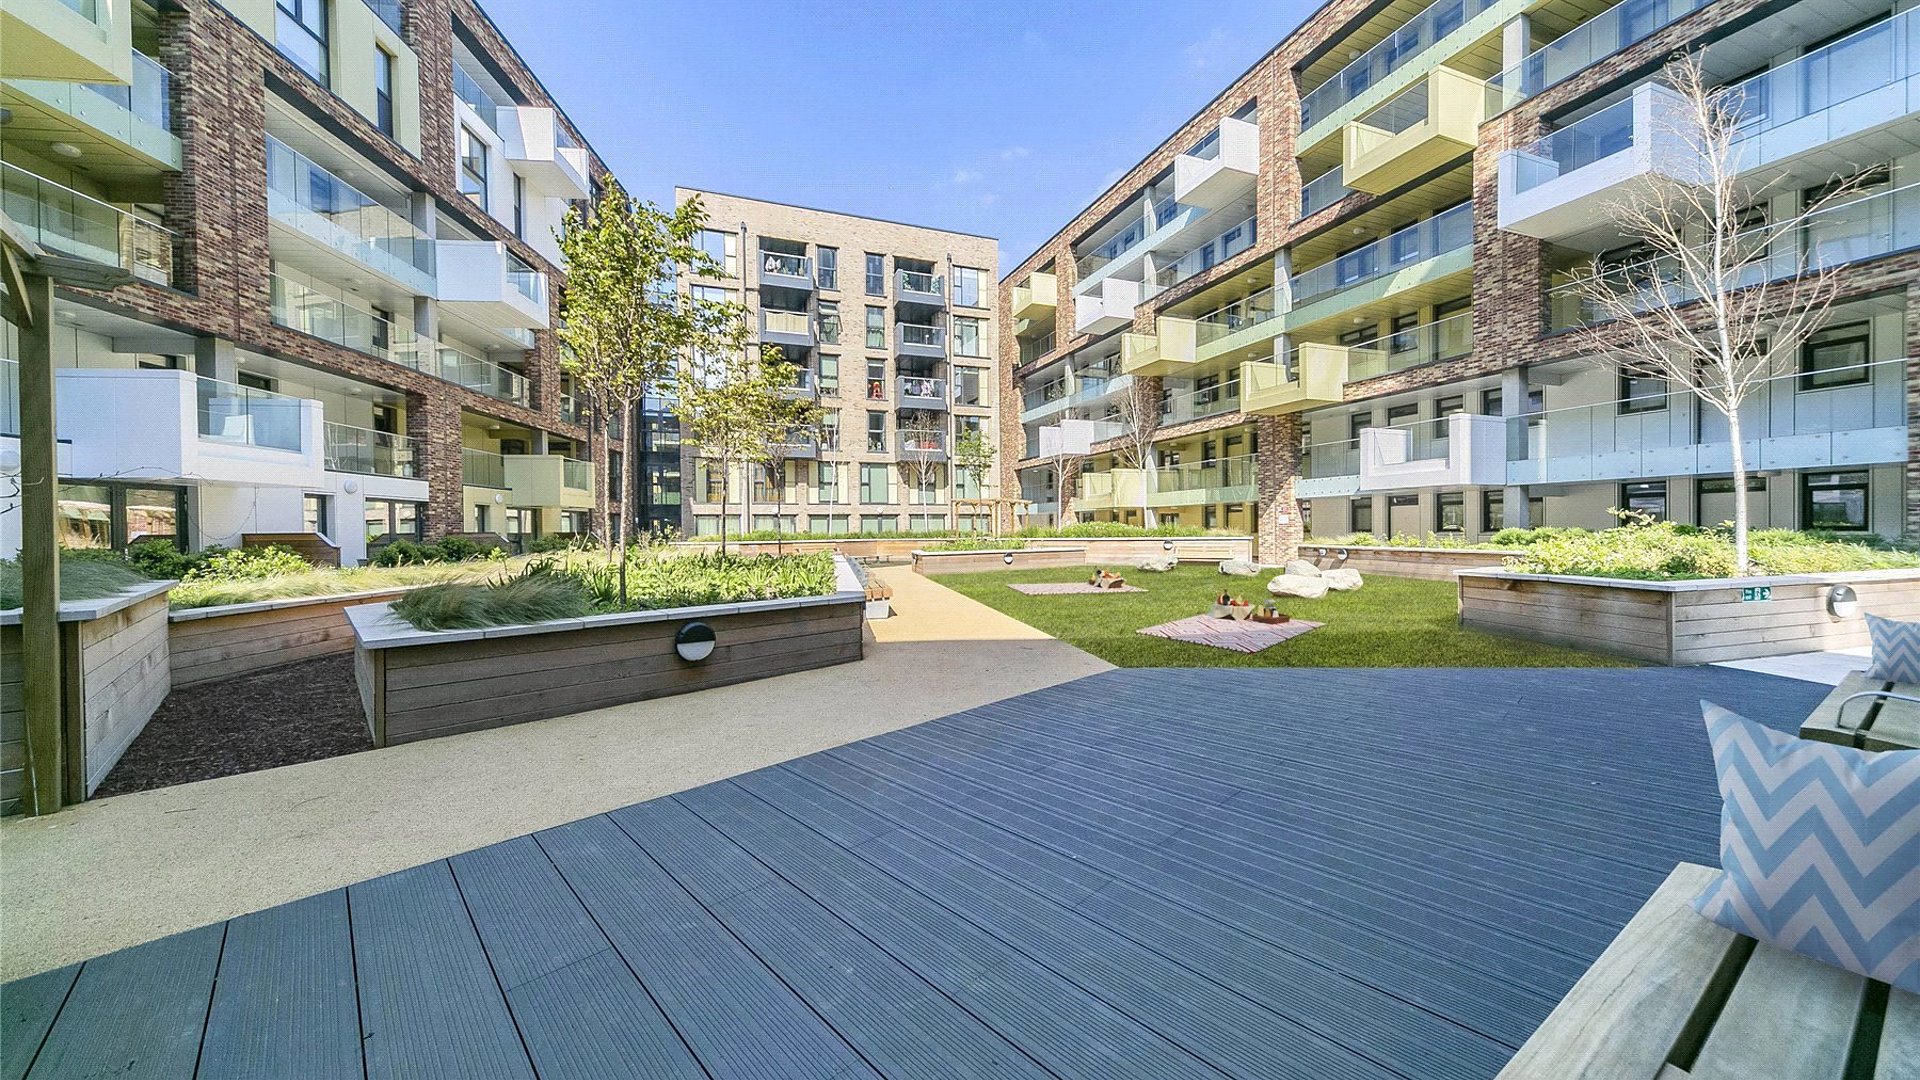 Apartments to Rent by JLL at The Horizon, Lewisham, SE10, communal gardens